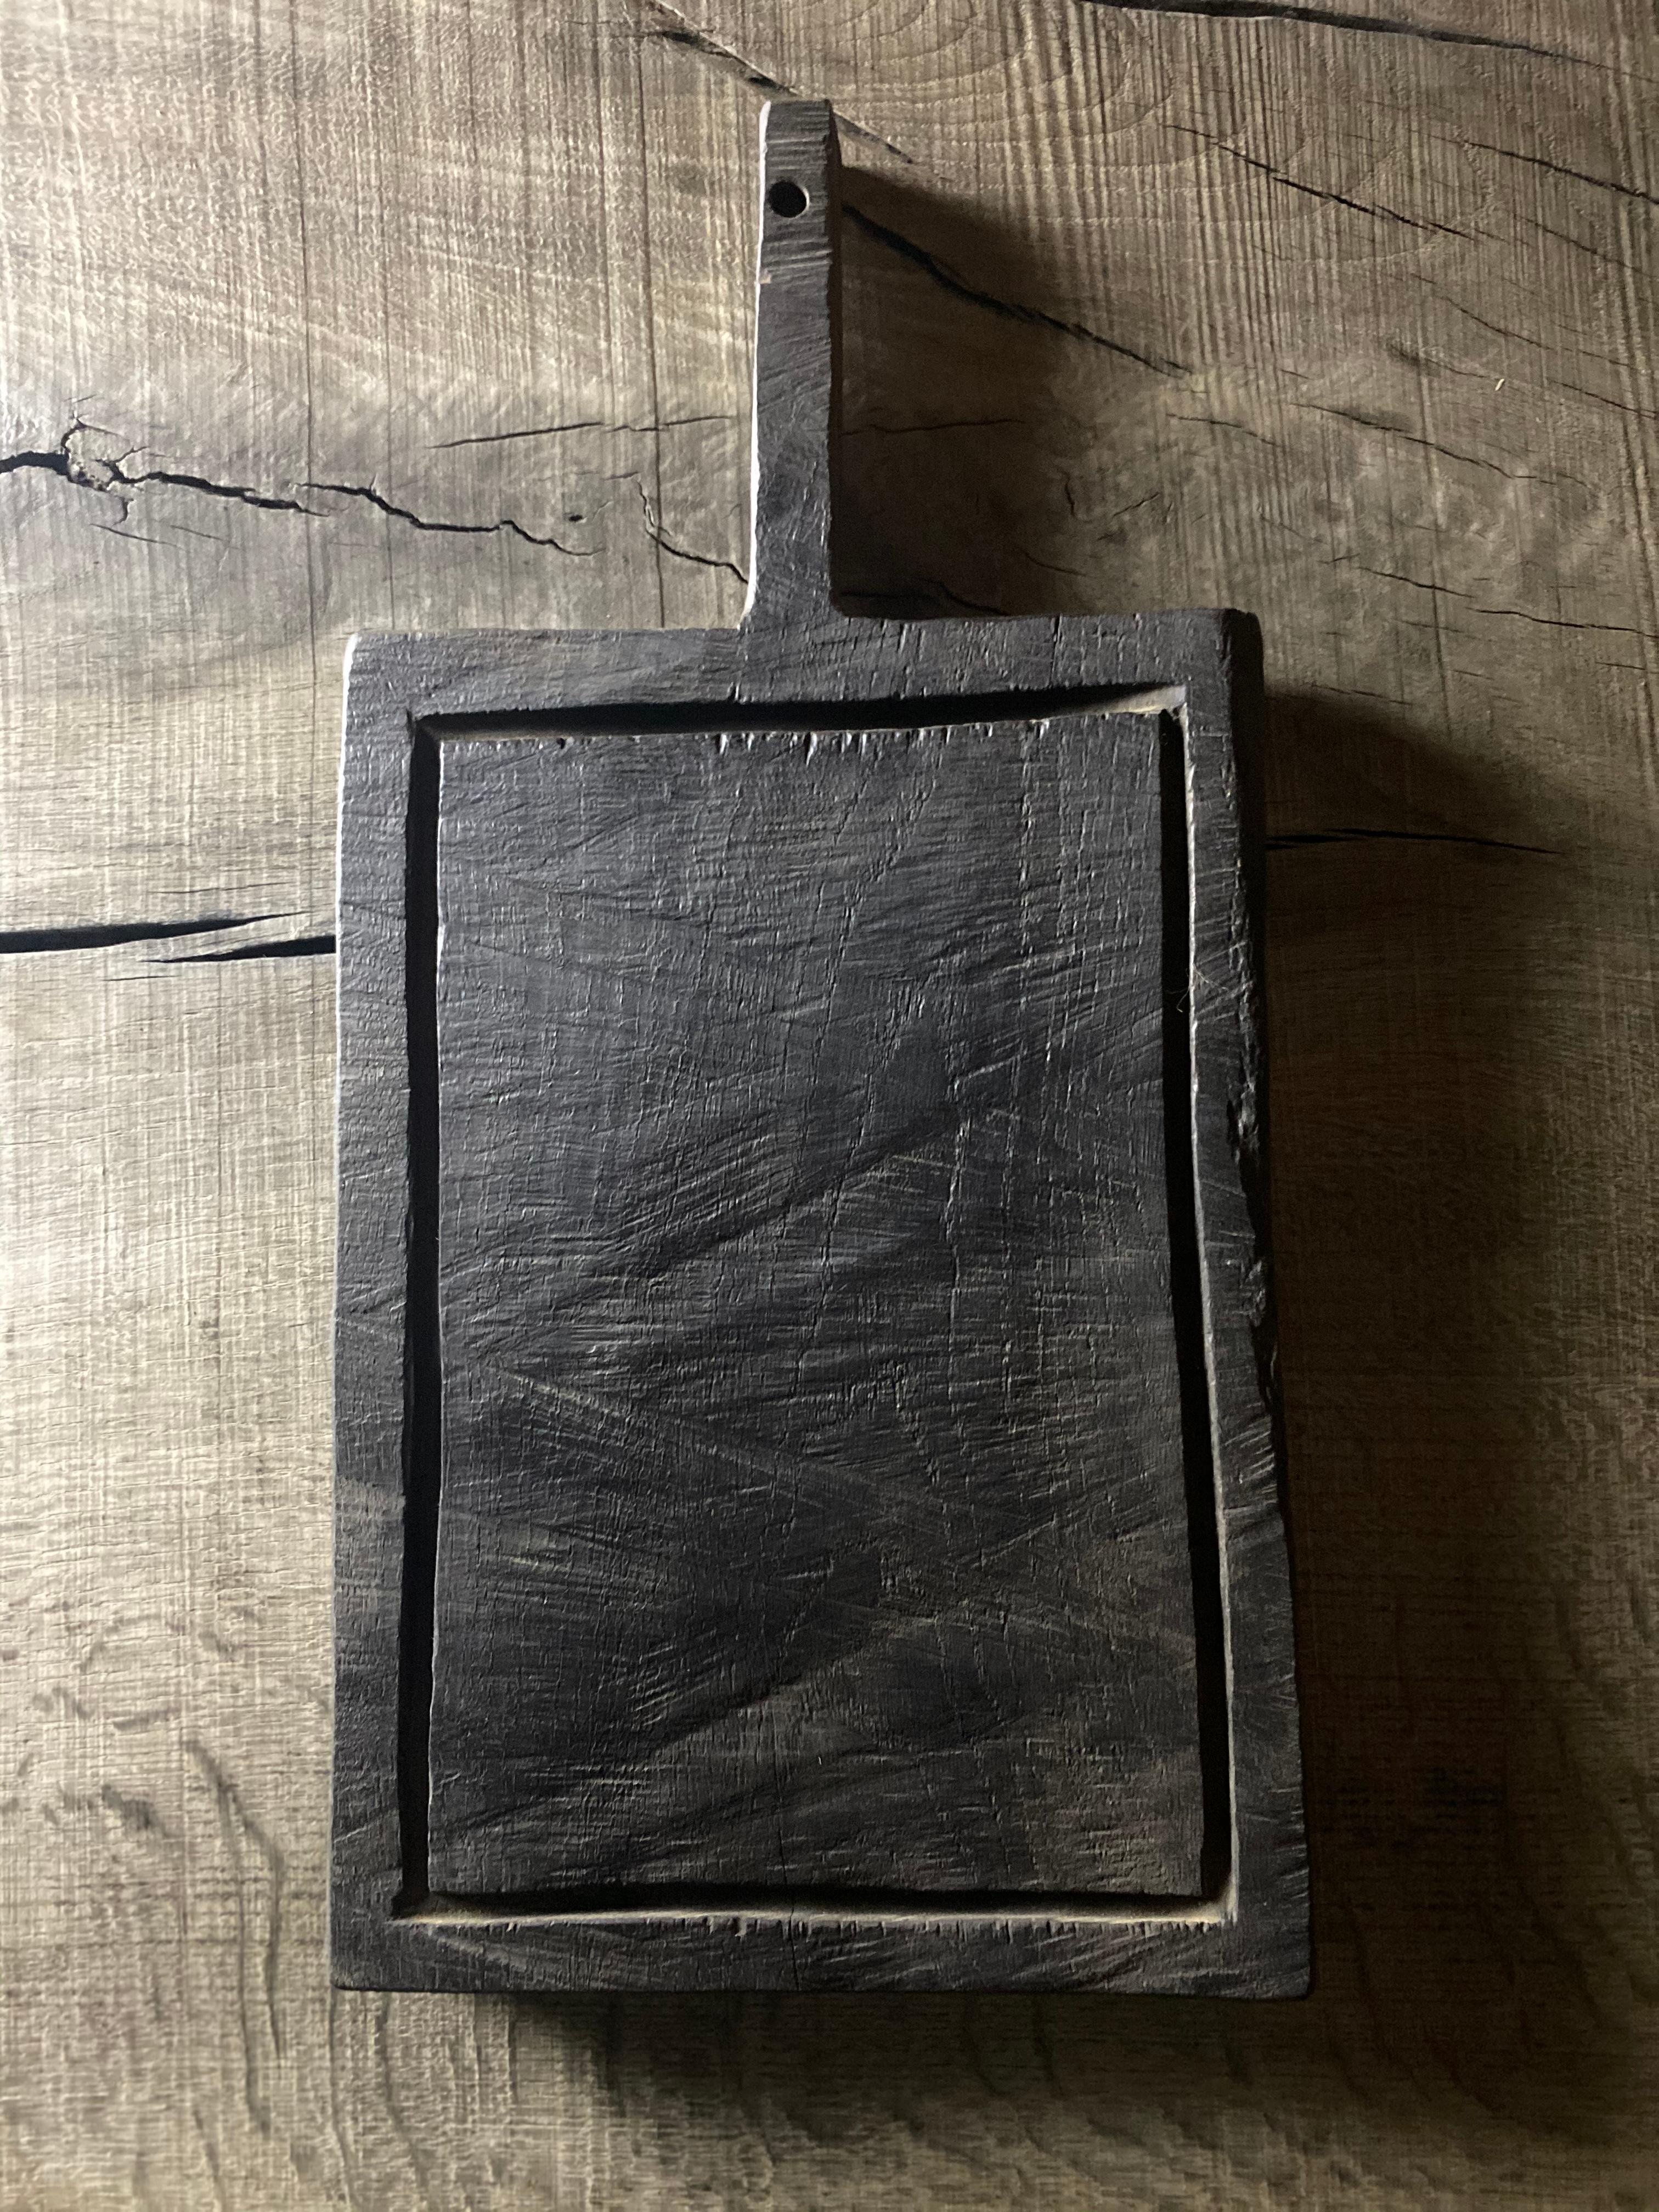 Decorative cutting board #5
Sculpted solid oak

Approximative size: from 20cm to 30cm (form 8'' to 12'')
Custom size available

SÓHA design studio conceives and produces furniture design and decorative objects in solid oak in an authentic style.